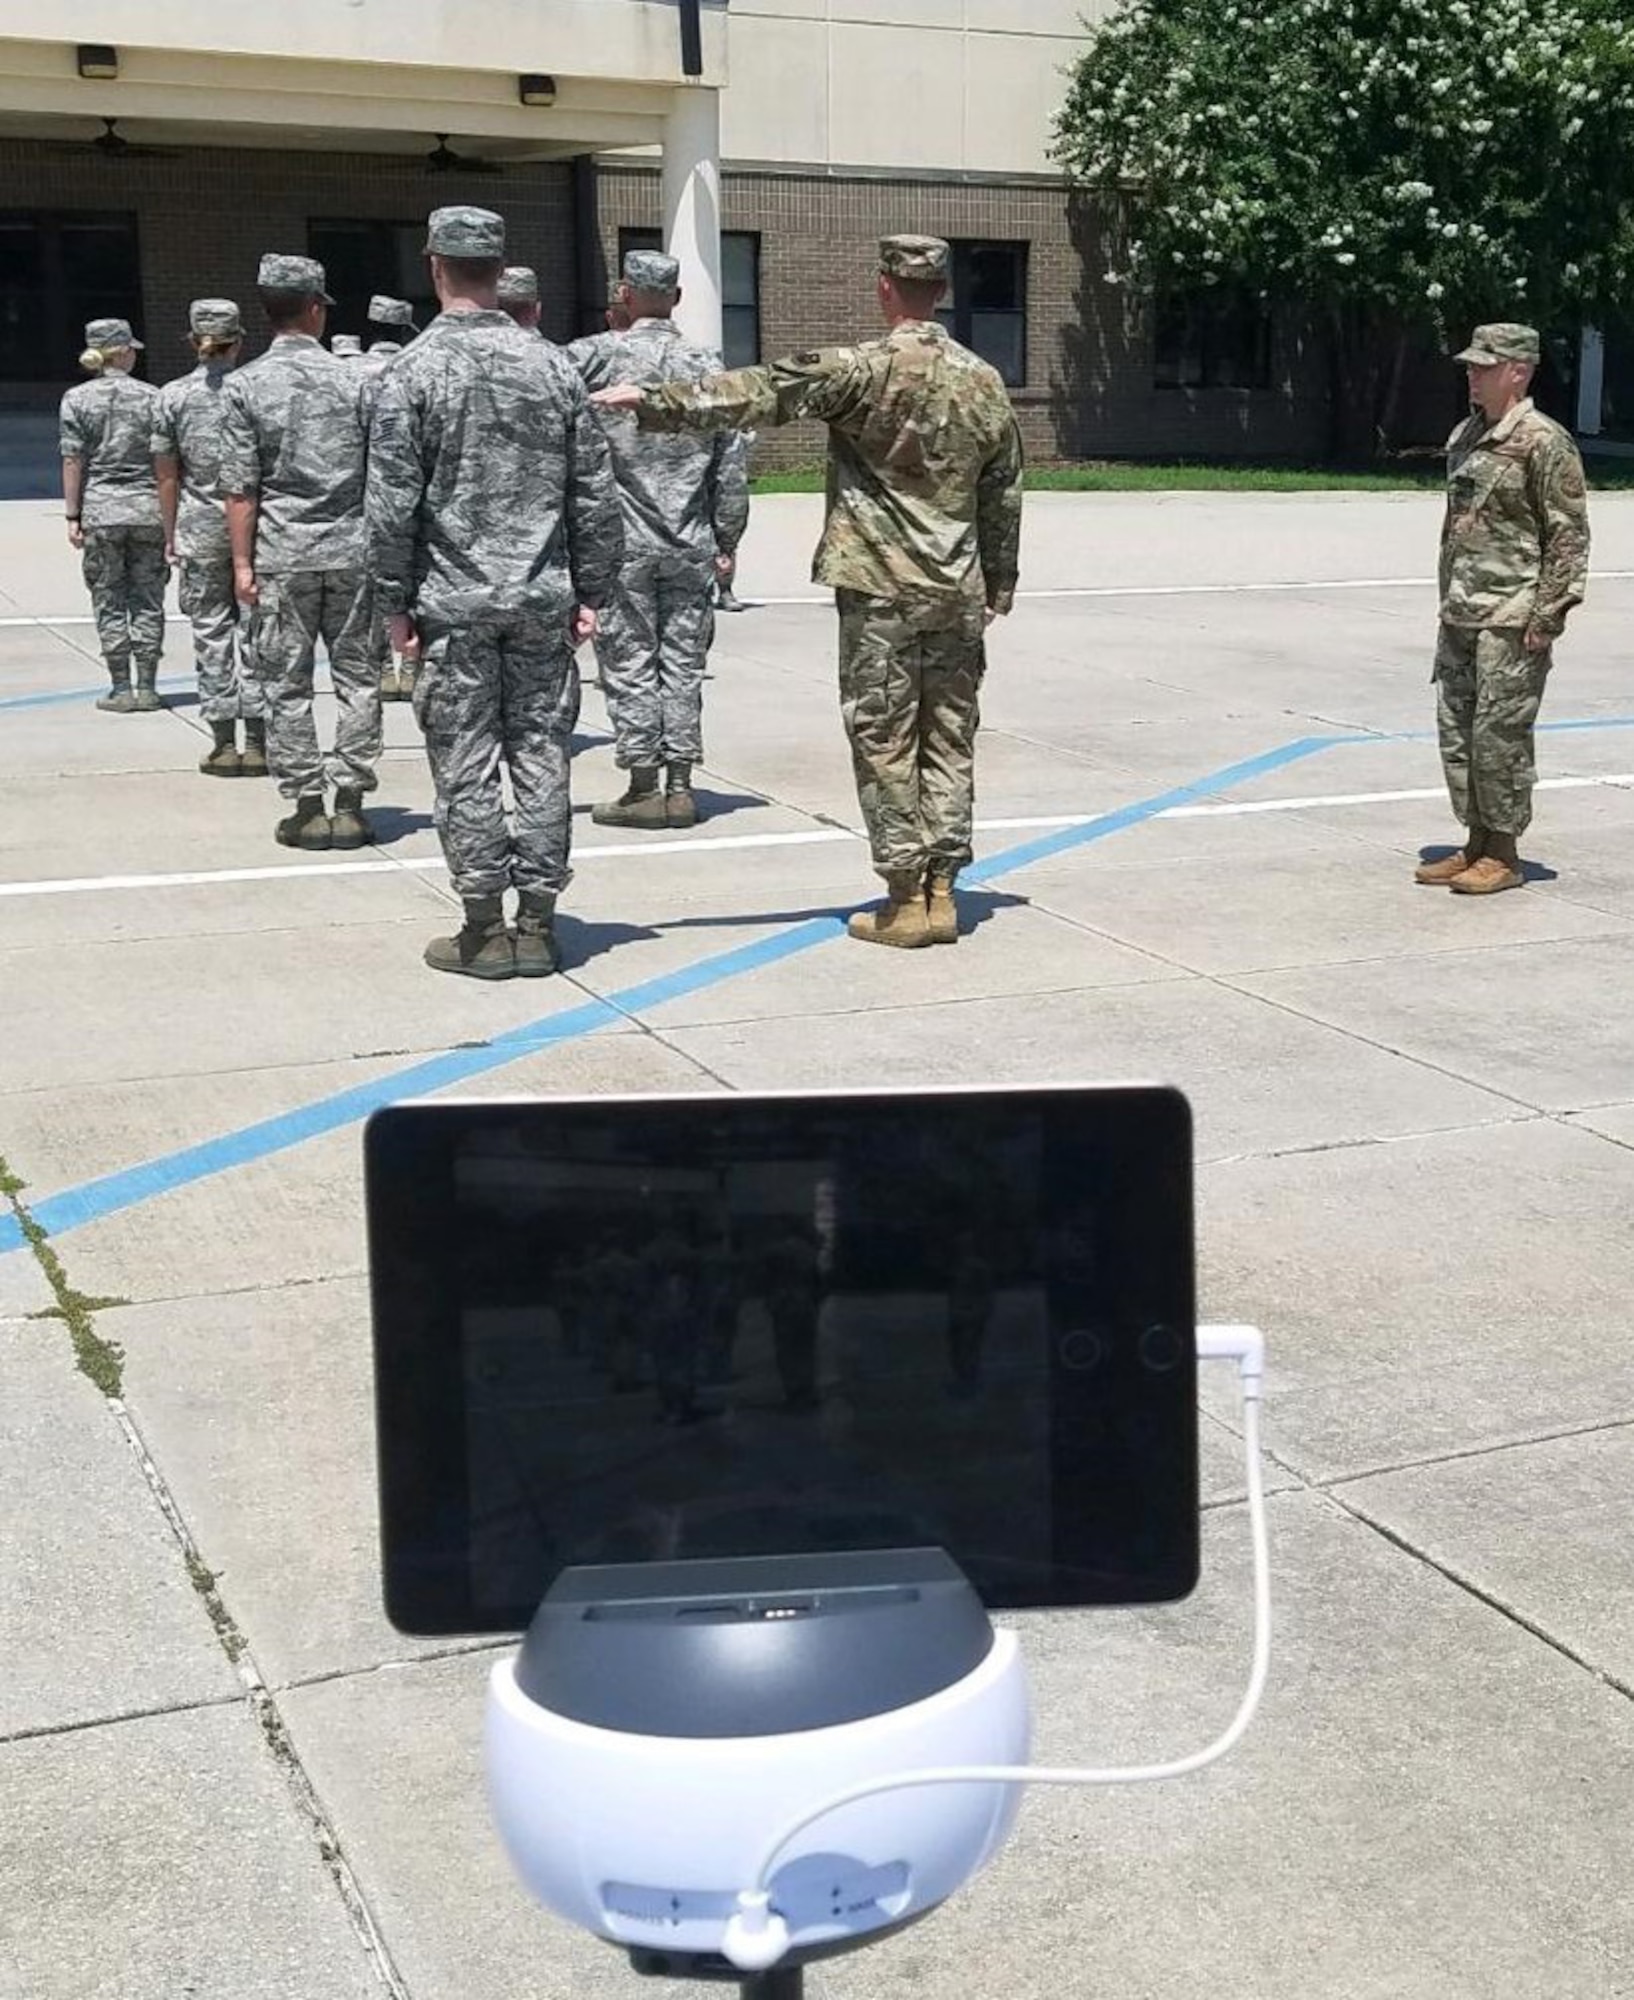 Military training leader course students conduct open ranks while using the Swivl video robot on Keesler Air Force Base, Mississippi, August 27, 2019. Swivl is a video robot designed to allow students to assess their own performance in the classroom, while increasing student engagement and supporting the Student-Centered Active Learning Environment with Upside-down Pedagogies learning model. Swivl gives students more ownership of their learning while reinforcing student interaction learning strategies: student-to-content, student-to-student, and student-to-instructor.